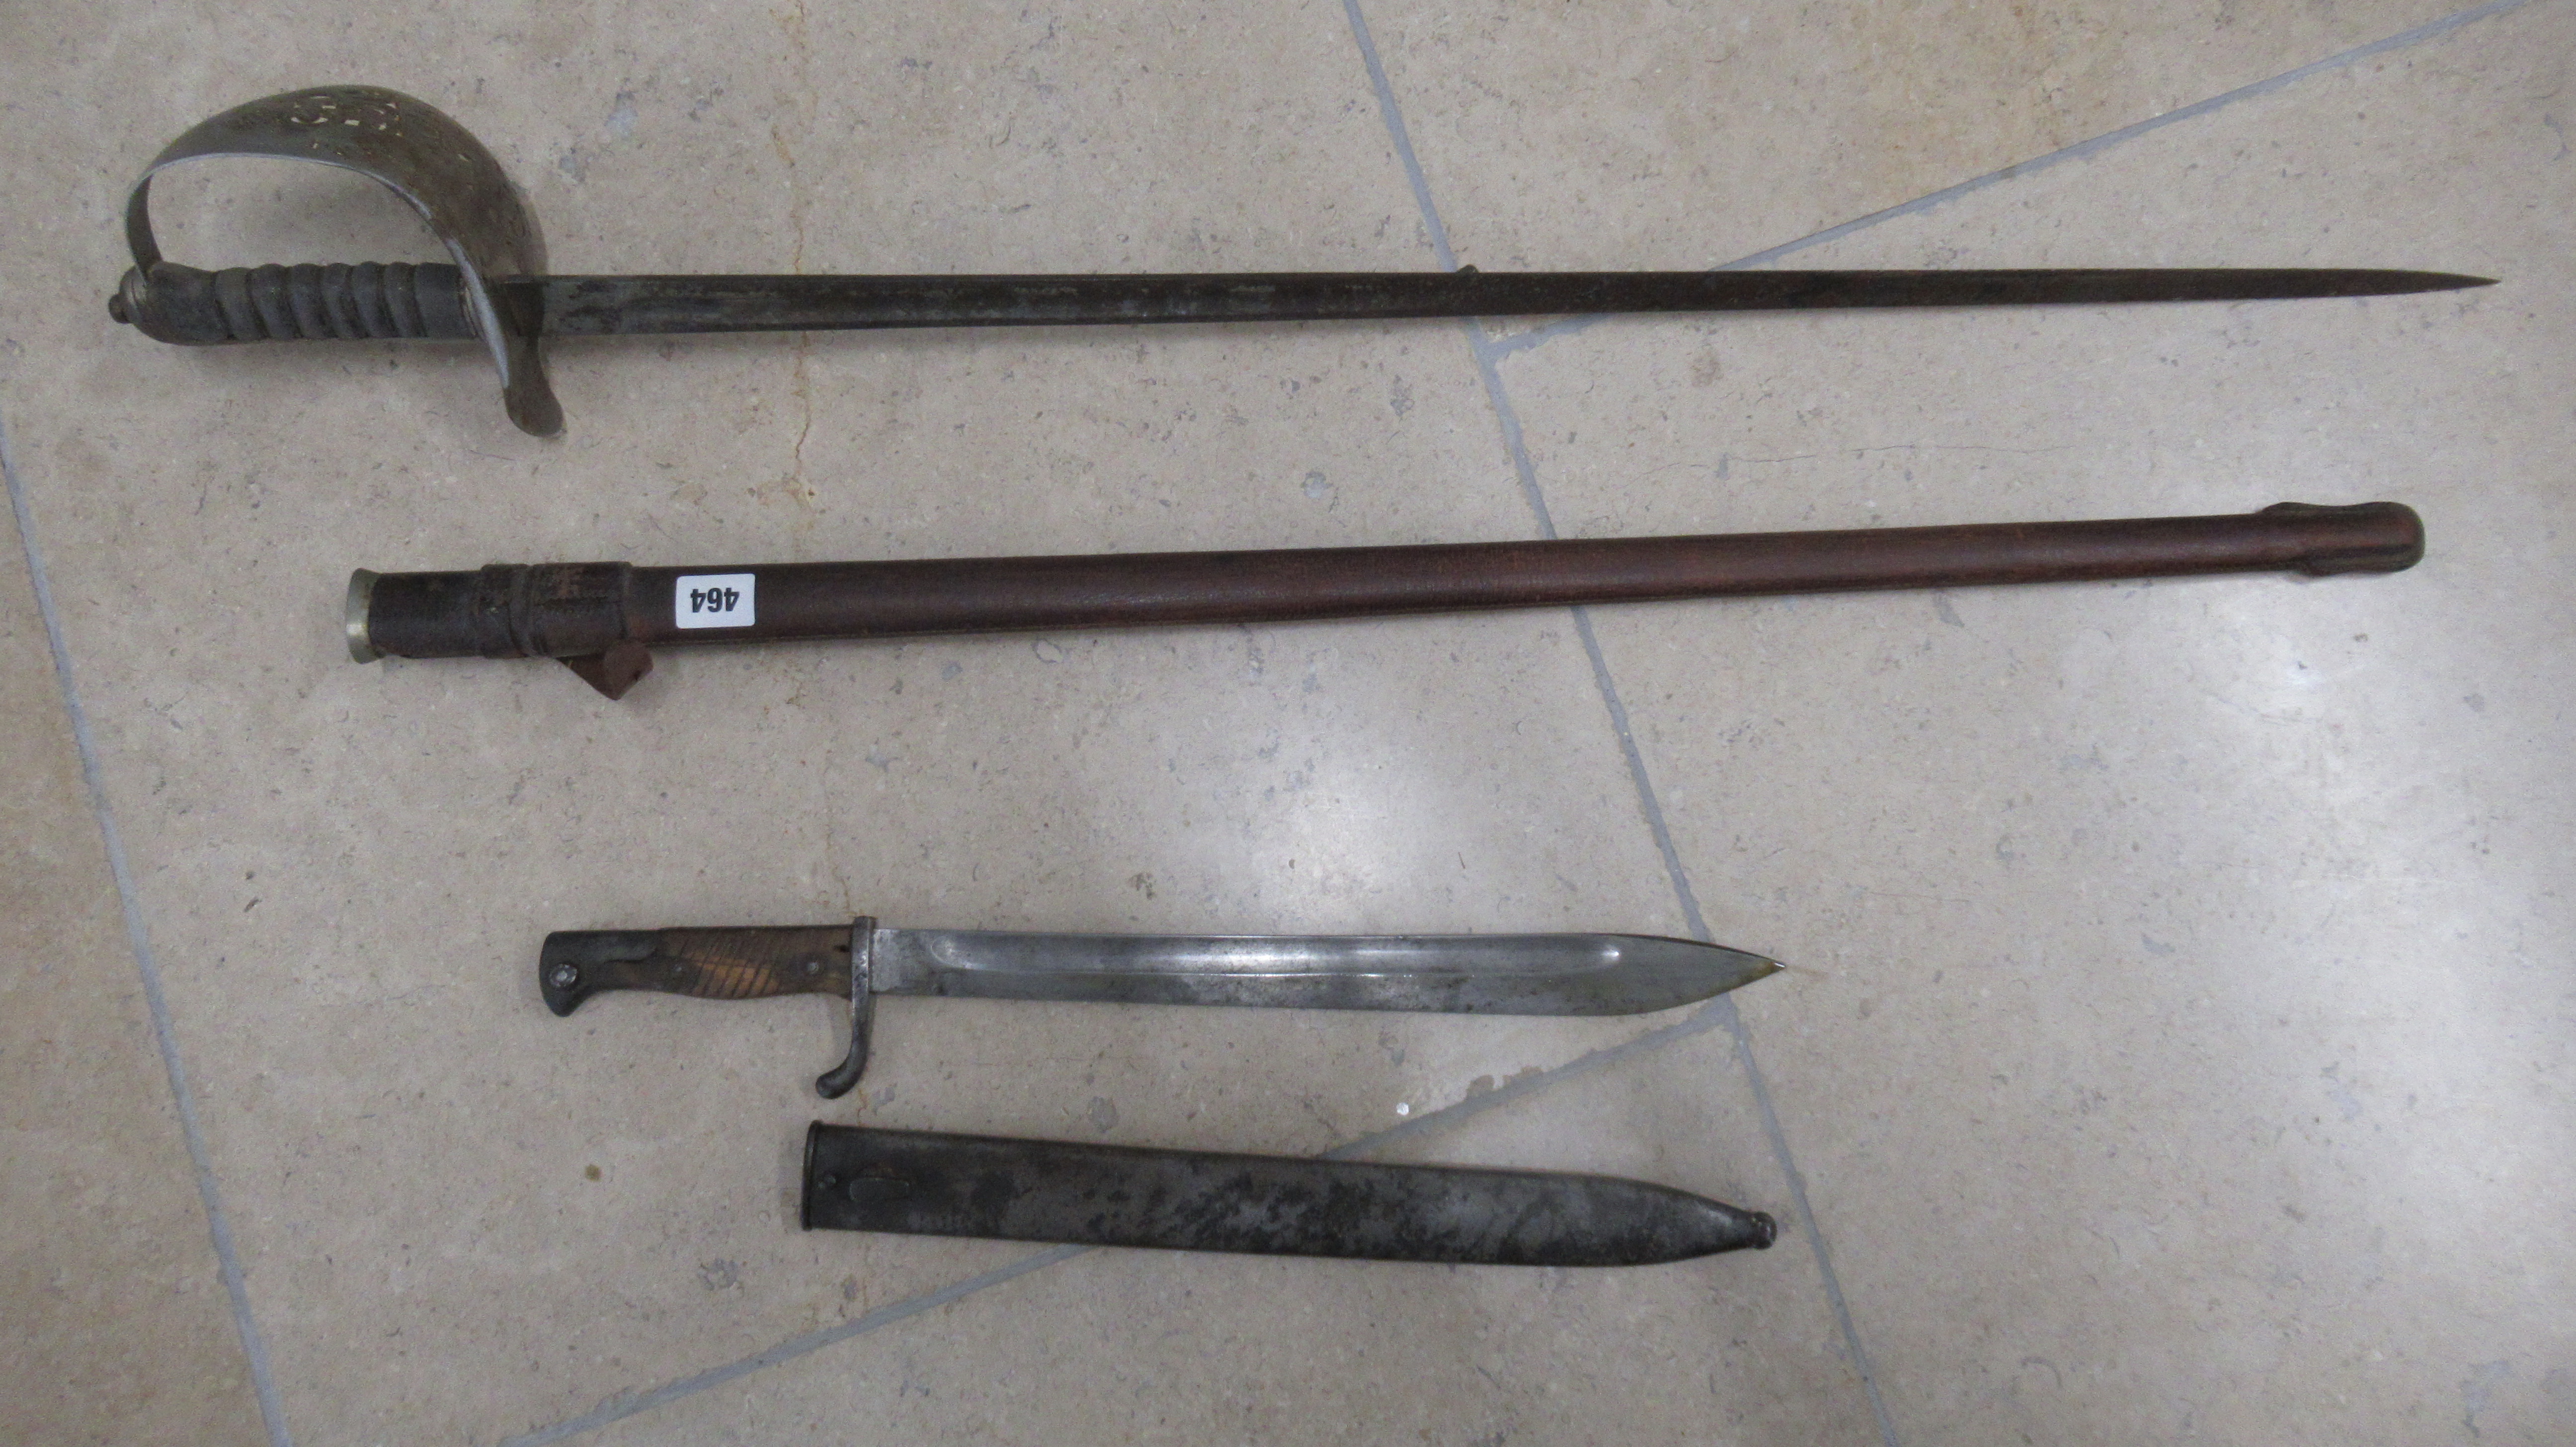 A sword and scabbard and a bayonet